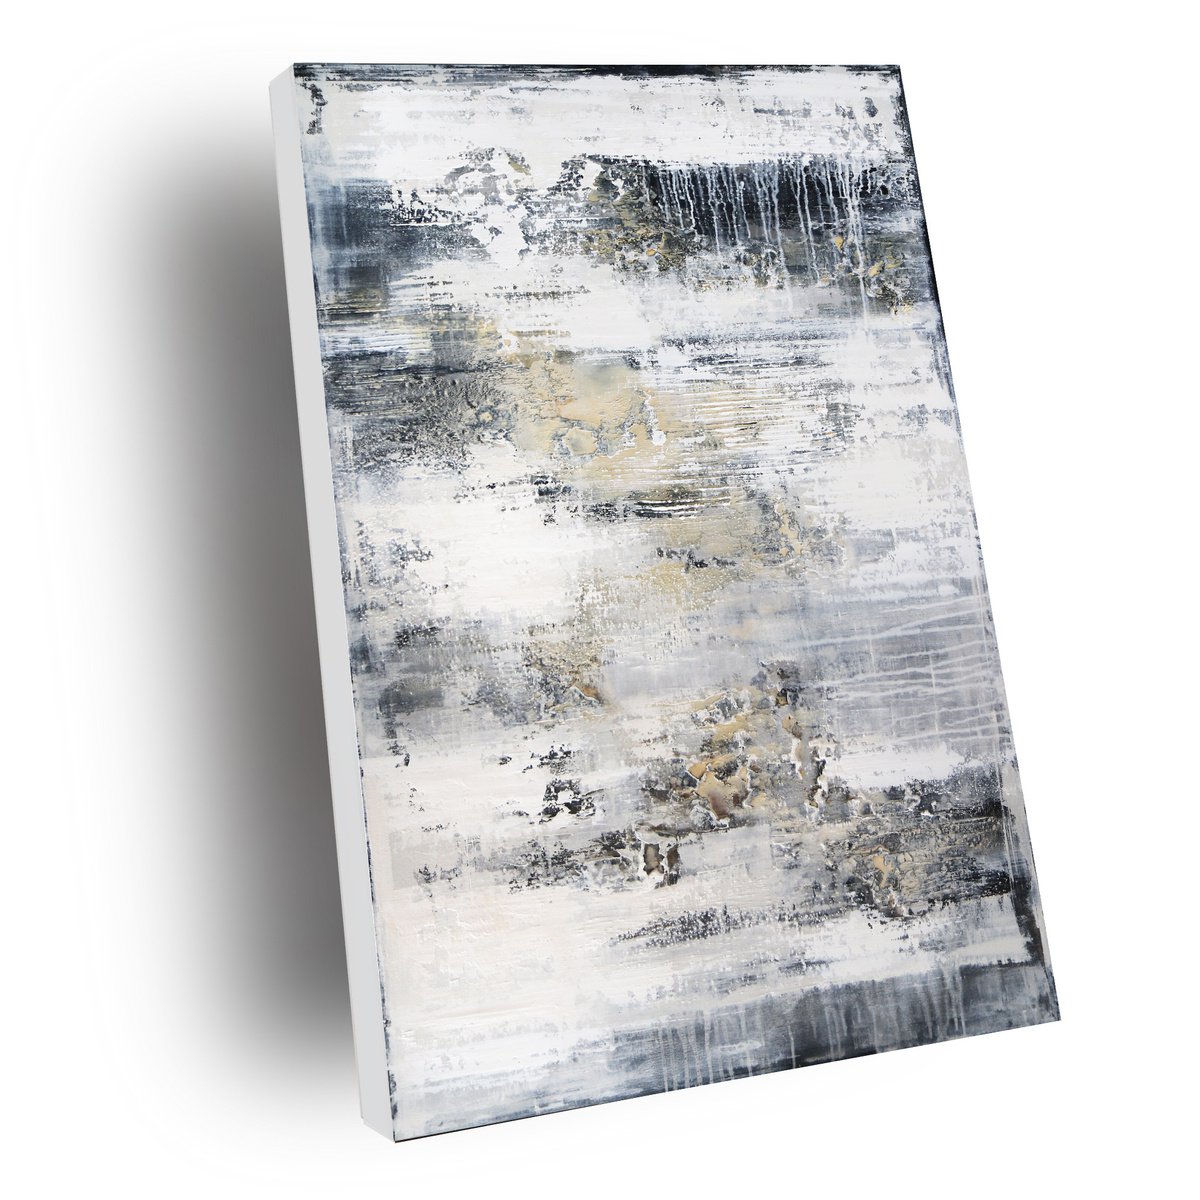 LIMESTONE - ABSTRACT ACRYLIC PAINTING TEXTURED * PASTEL COLORS * READY TO HANG by Inez Froehlich